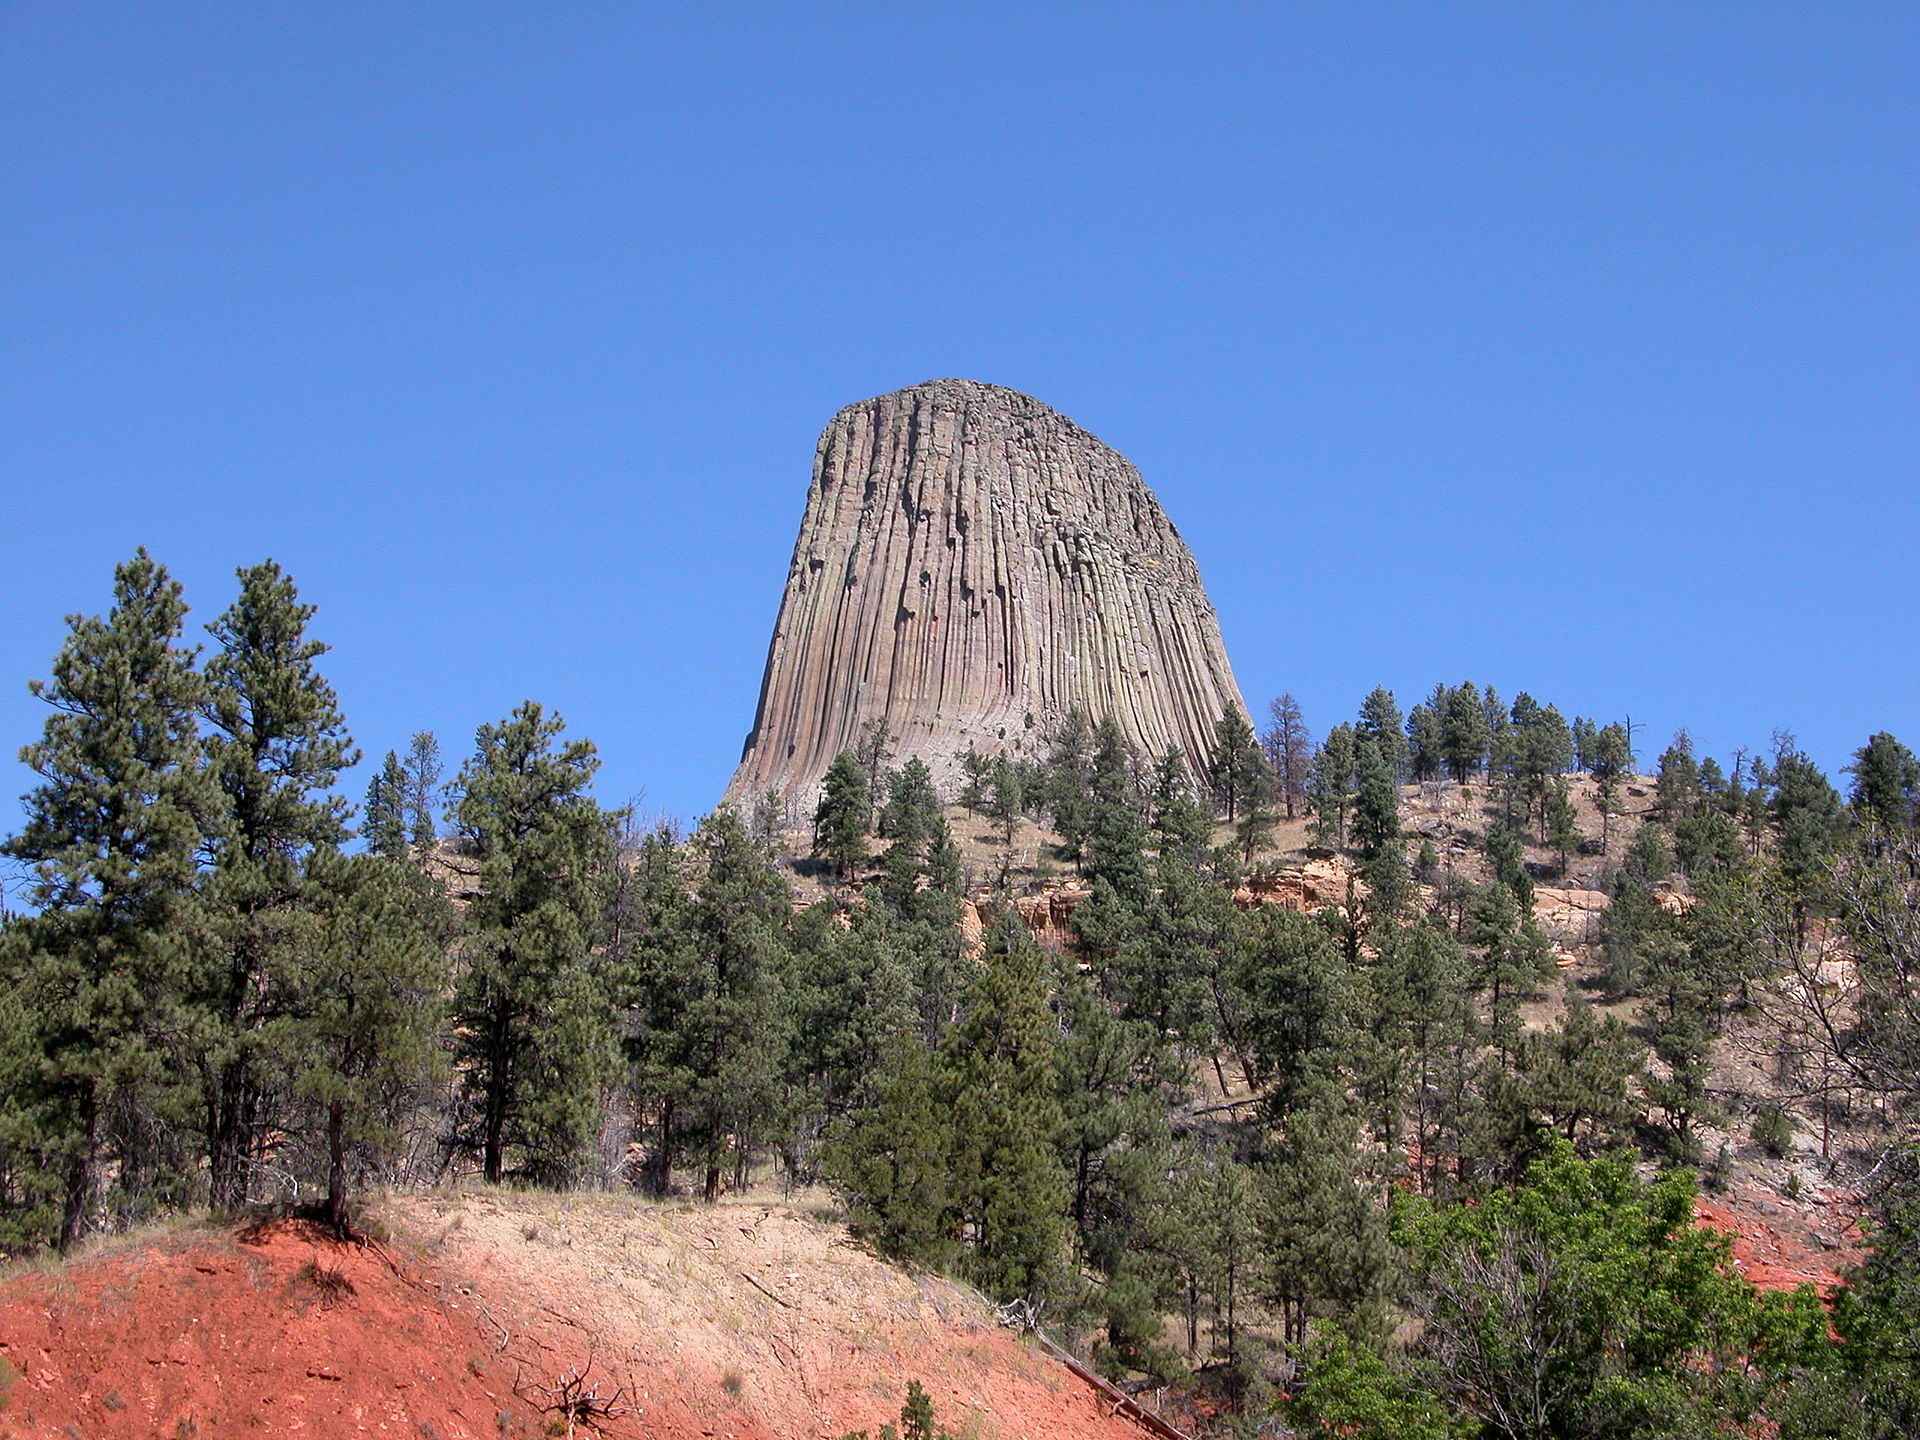 Piines surrounding Wyoming 's Devil' s Tower, a monolith rising out of the hills.